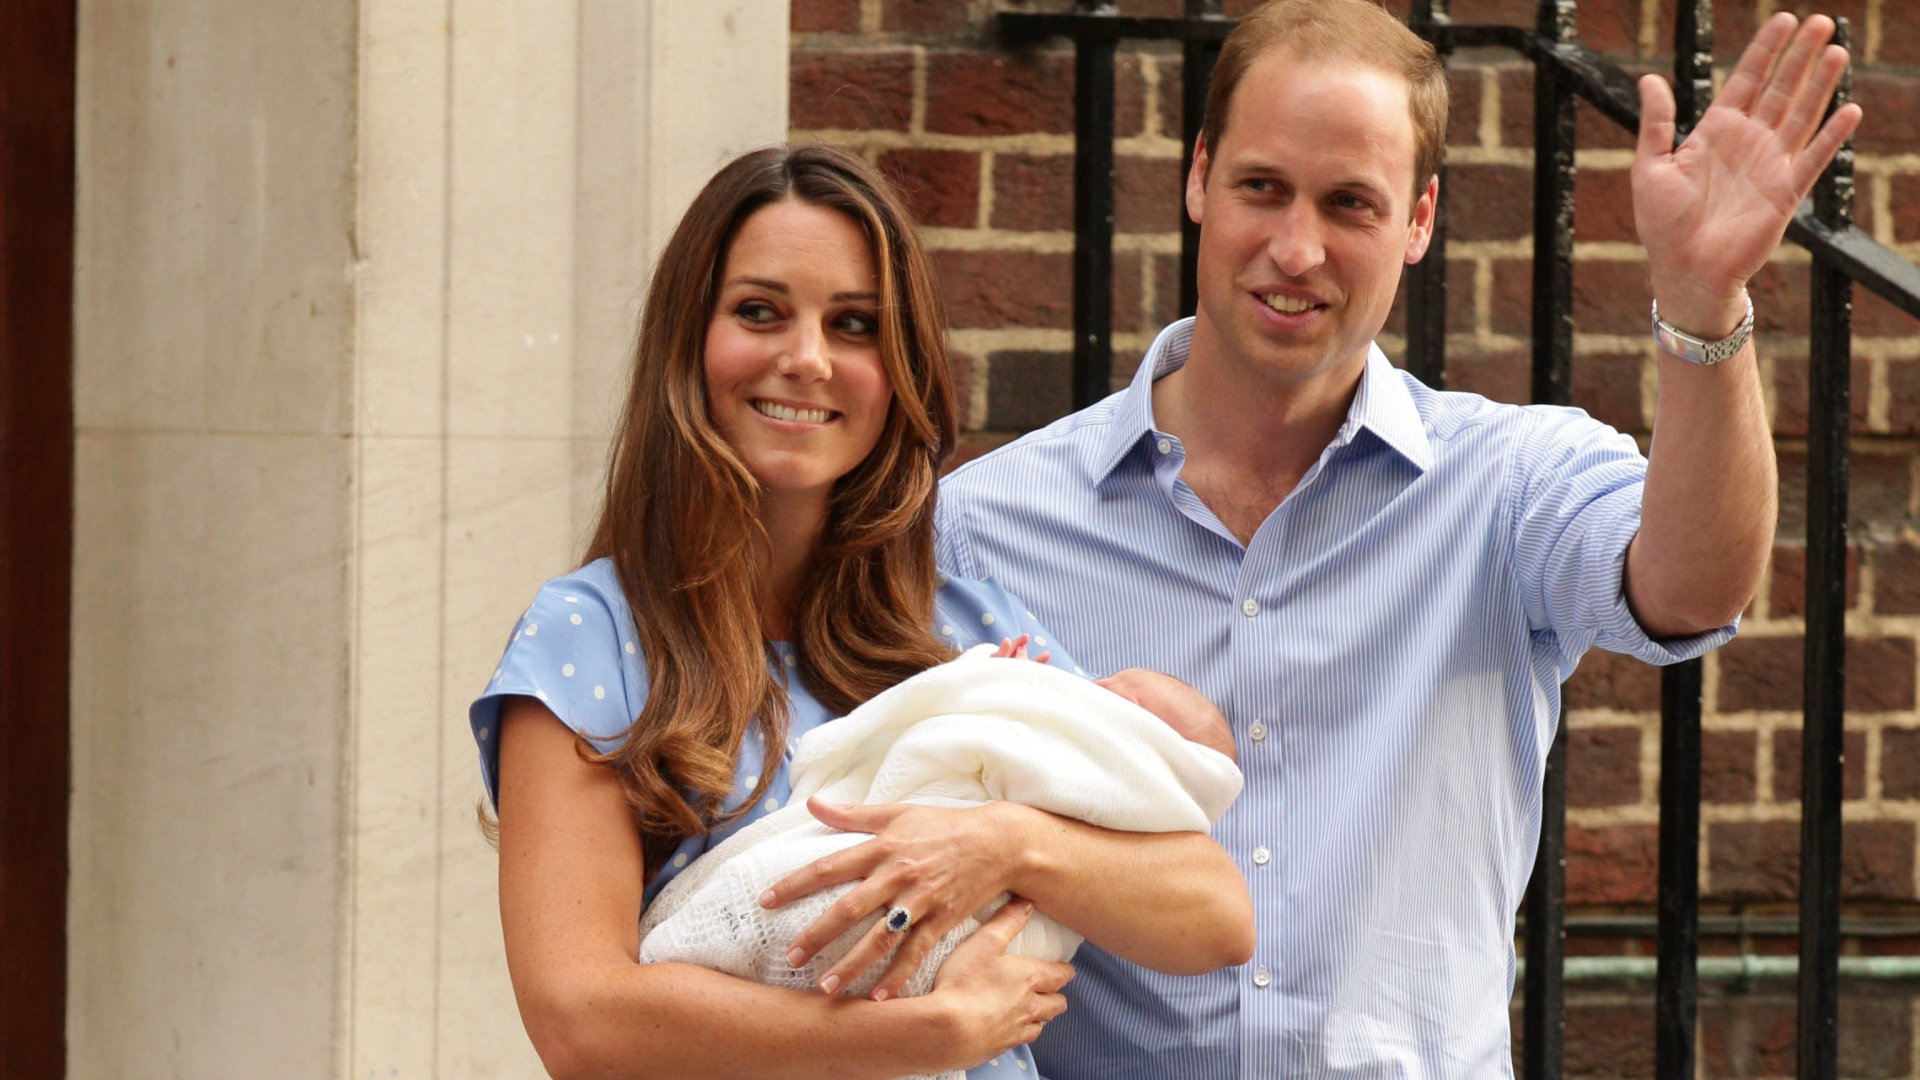 Royal Family Kate Middleton and William Prince wallpaper 1920x1080